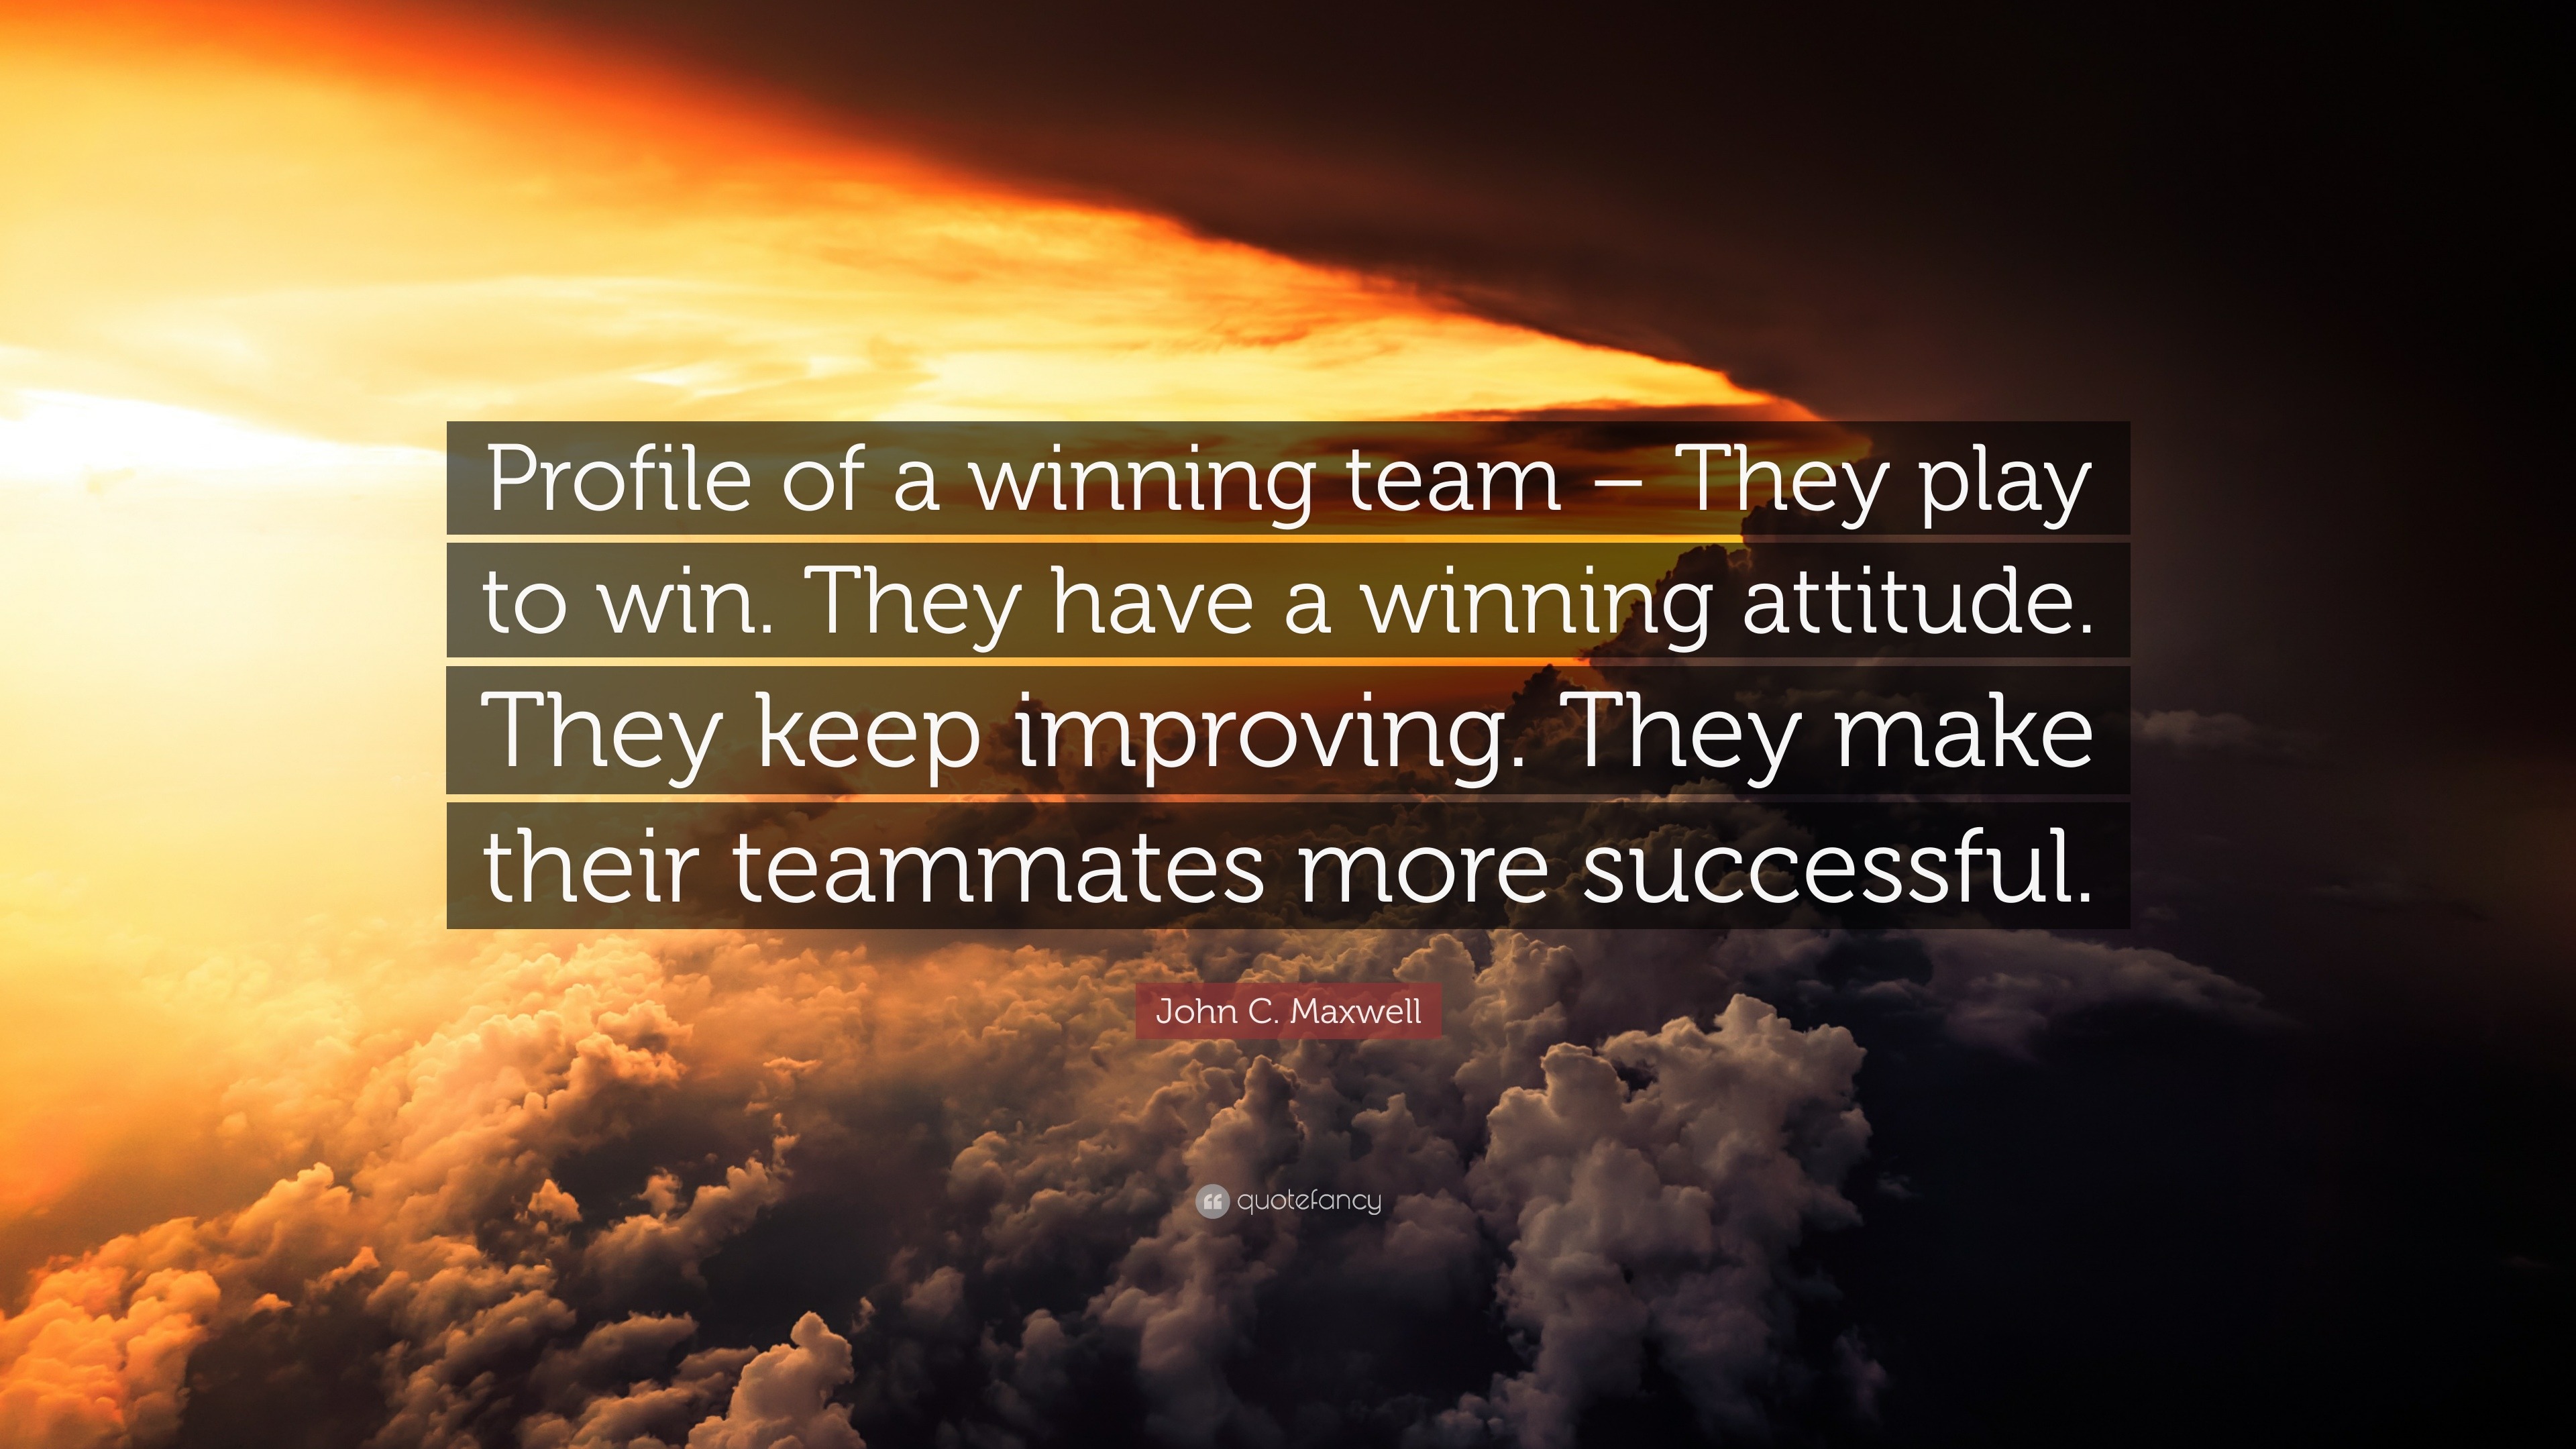 John C. Maxwell Quote: “Profile of a winning team – They play to win